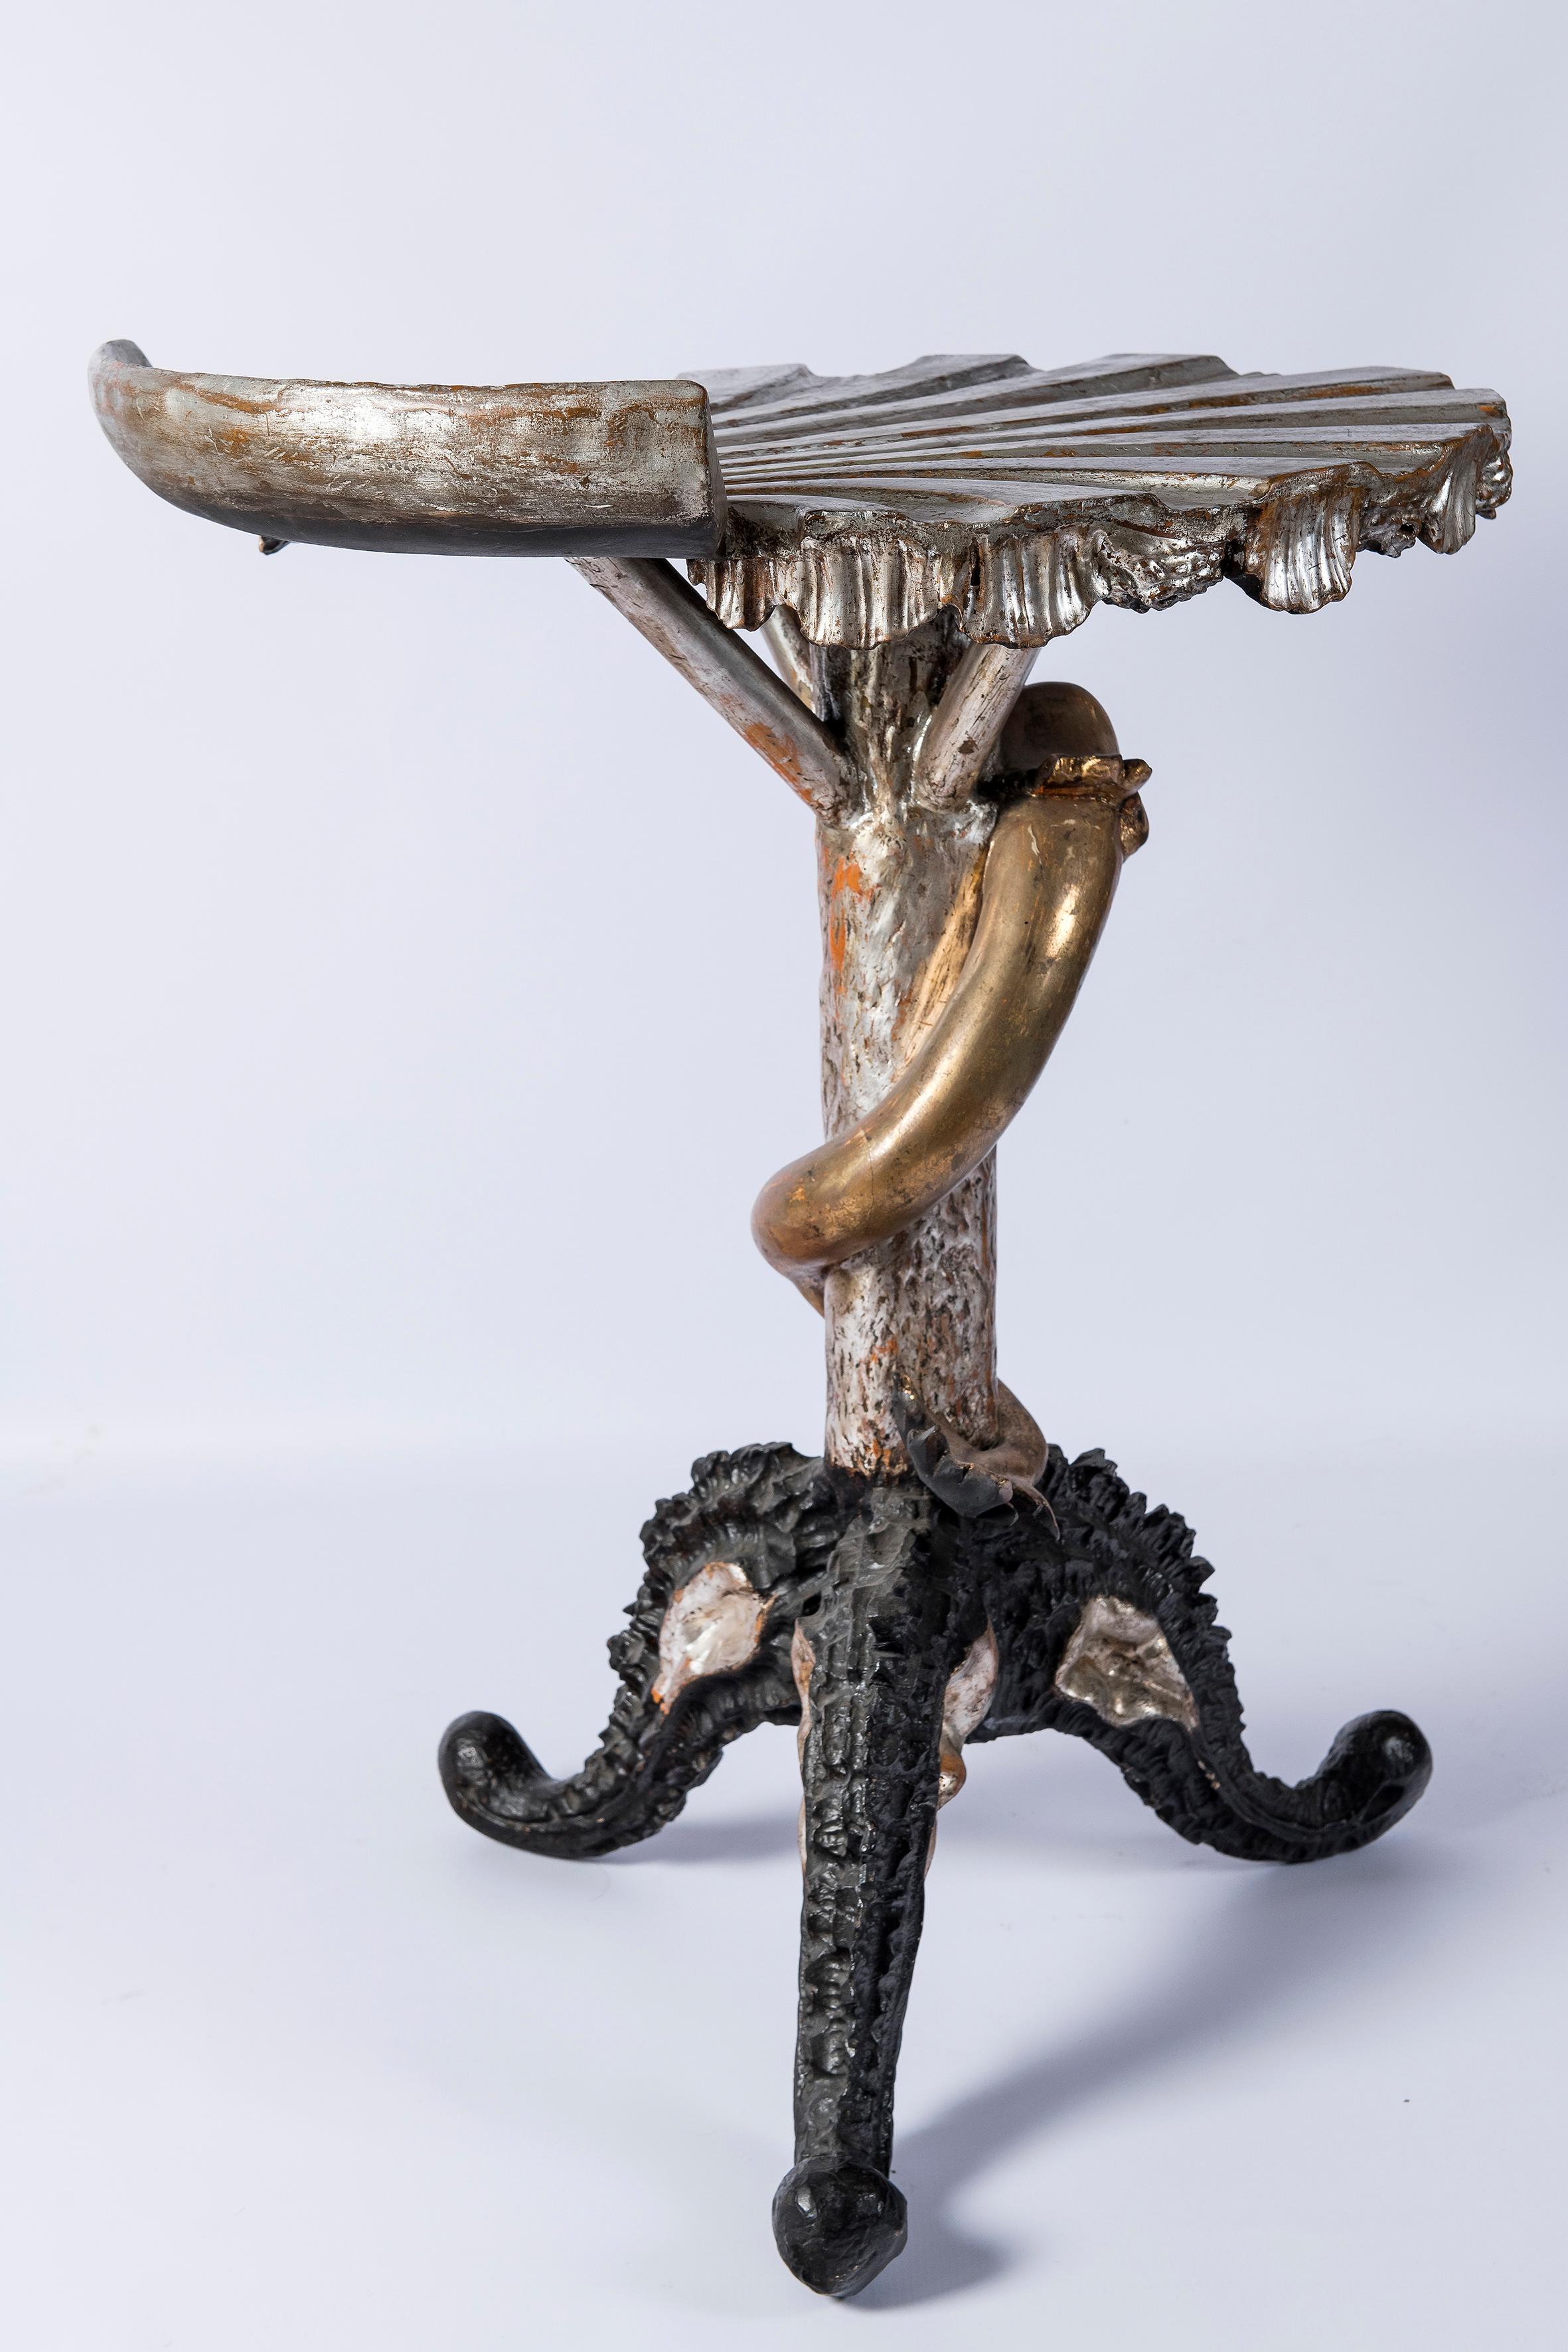 Gilt and silver wood Venetian Grotto style table, Italy, circa 1890. Pauly et Cie manufacture.